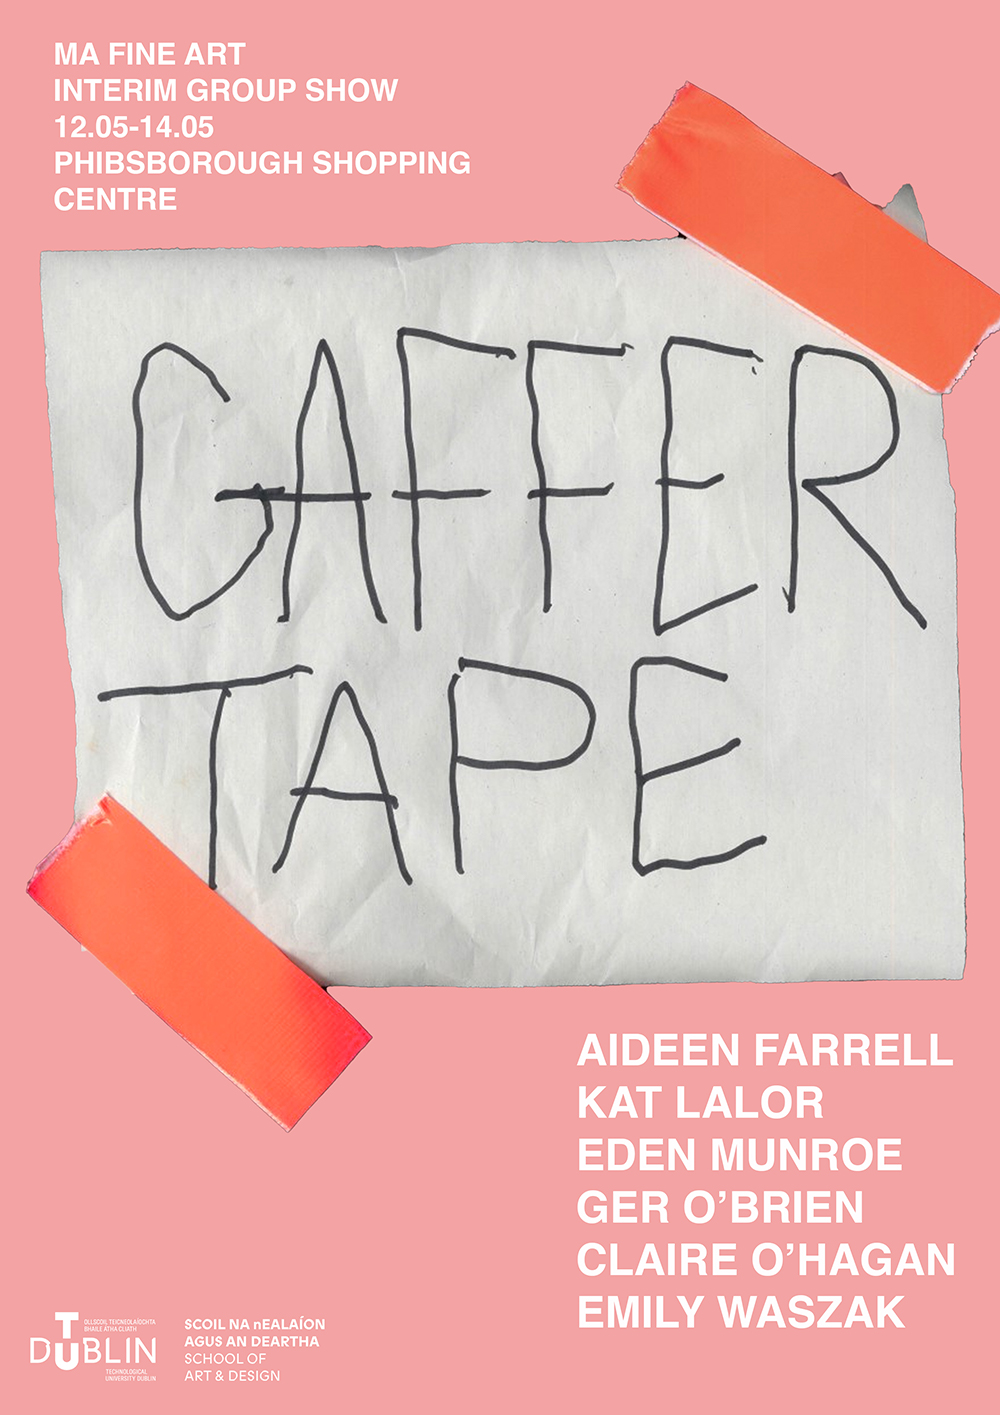 The Fine Art MA at TU Dublin are pleased to invite you to 'GAFFER-TAPE'  Launching Friday 12 May @ 6pm 1st Floor, Phibsborough Shopping Centre, Dublin 7  Running until 14 May   ‘Gaffer Tape’ is an interim group show demarcating a midpoint of development for the Fine Art MA students. This exhibition navigates across themes of queer archaeology, speculative futures, feminism and bodily subjects, the